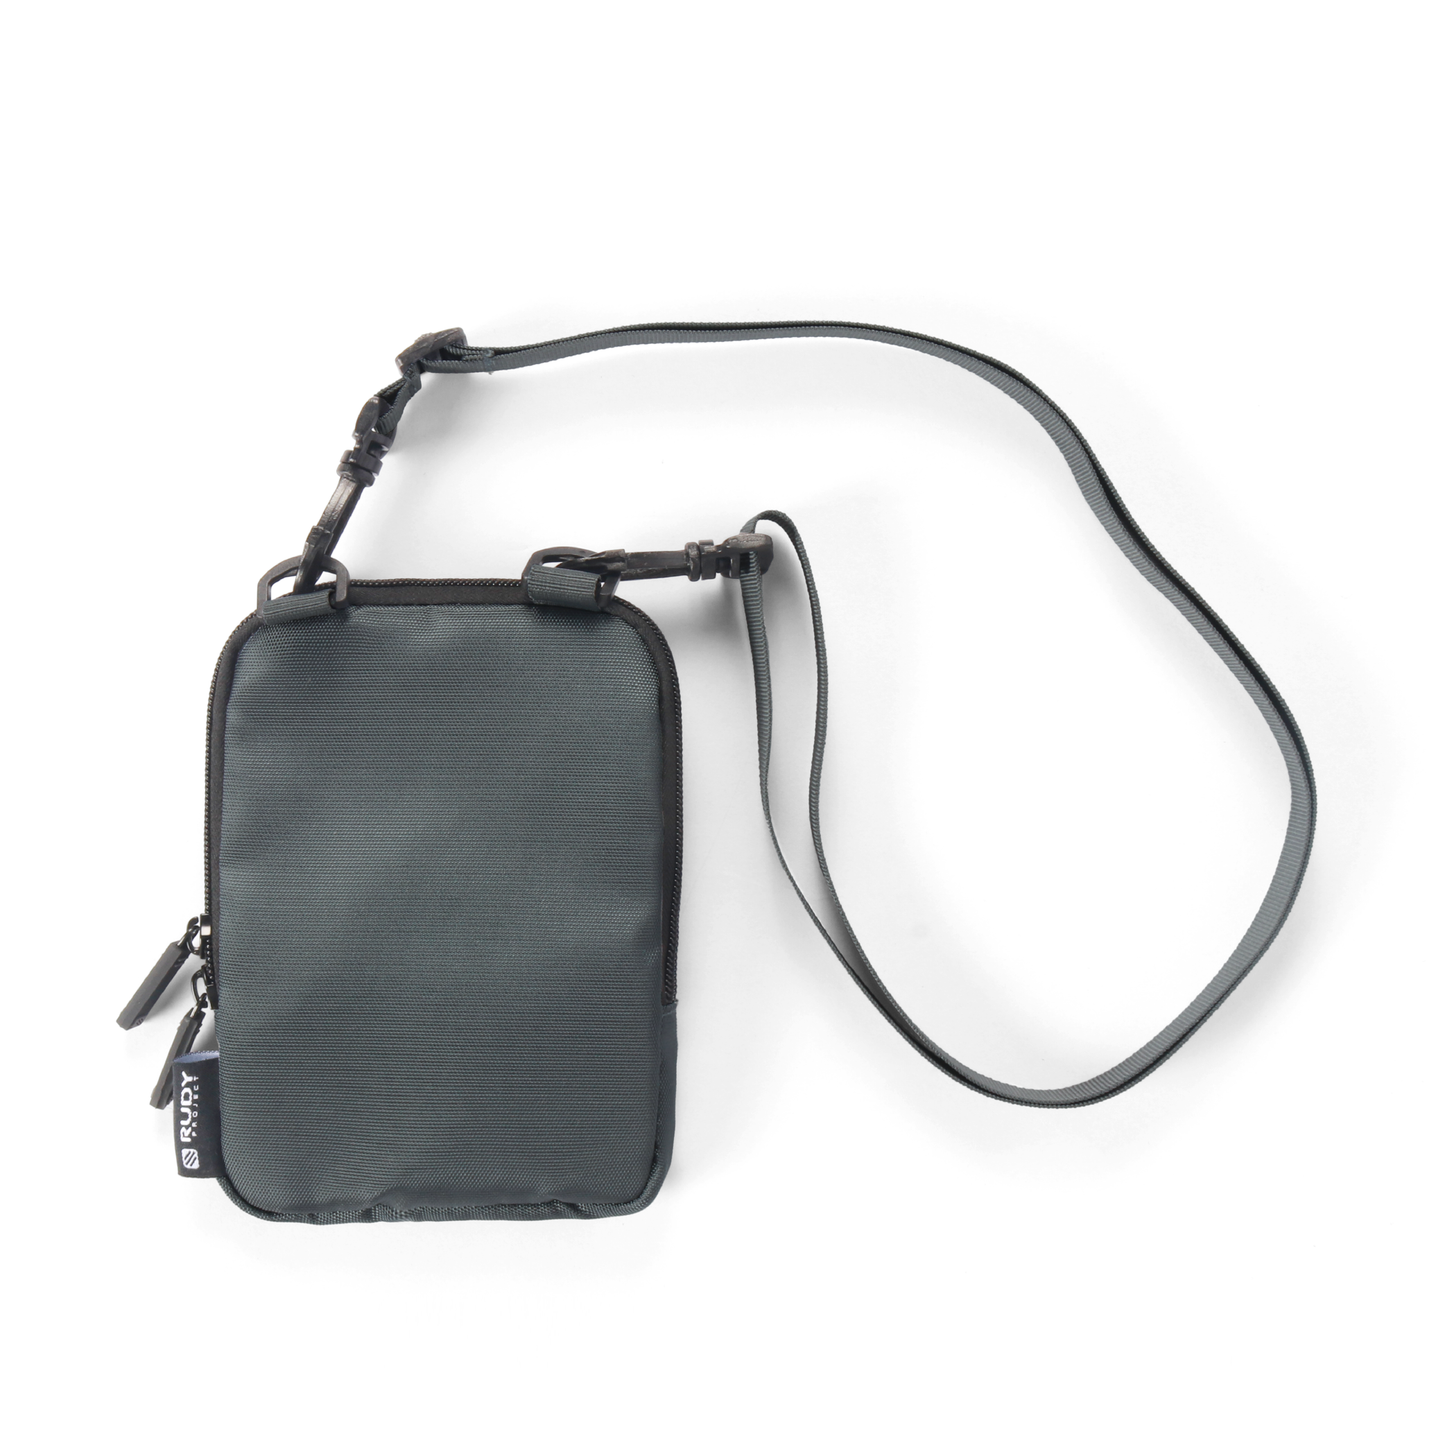 Puglia Neck Wallet in Grey for Travel Everyday or Casual